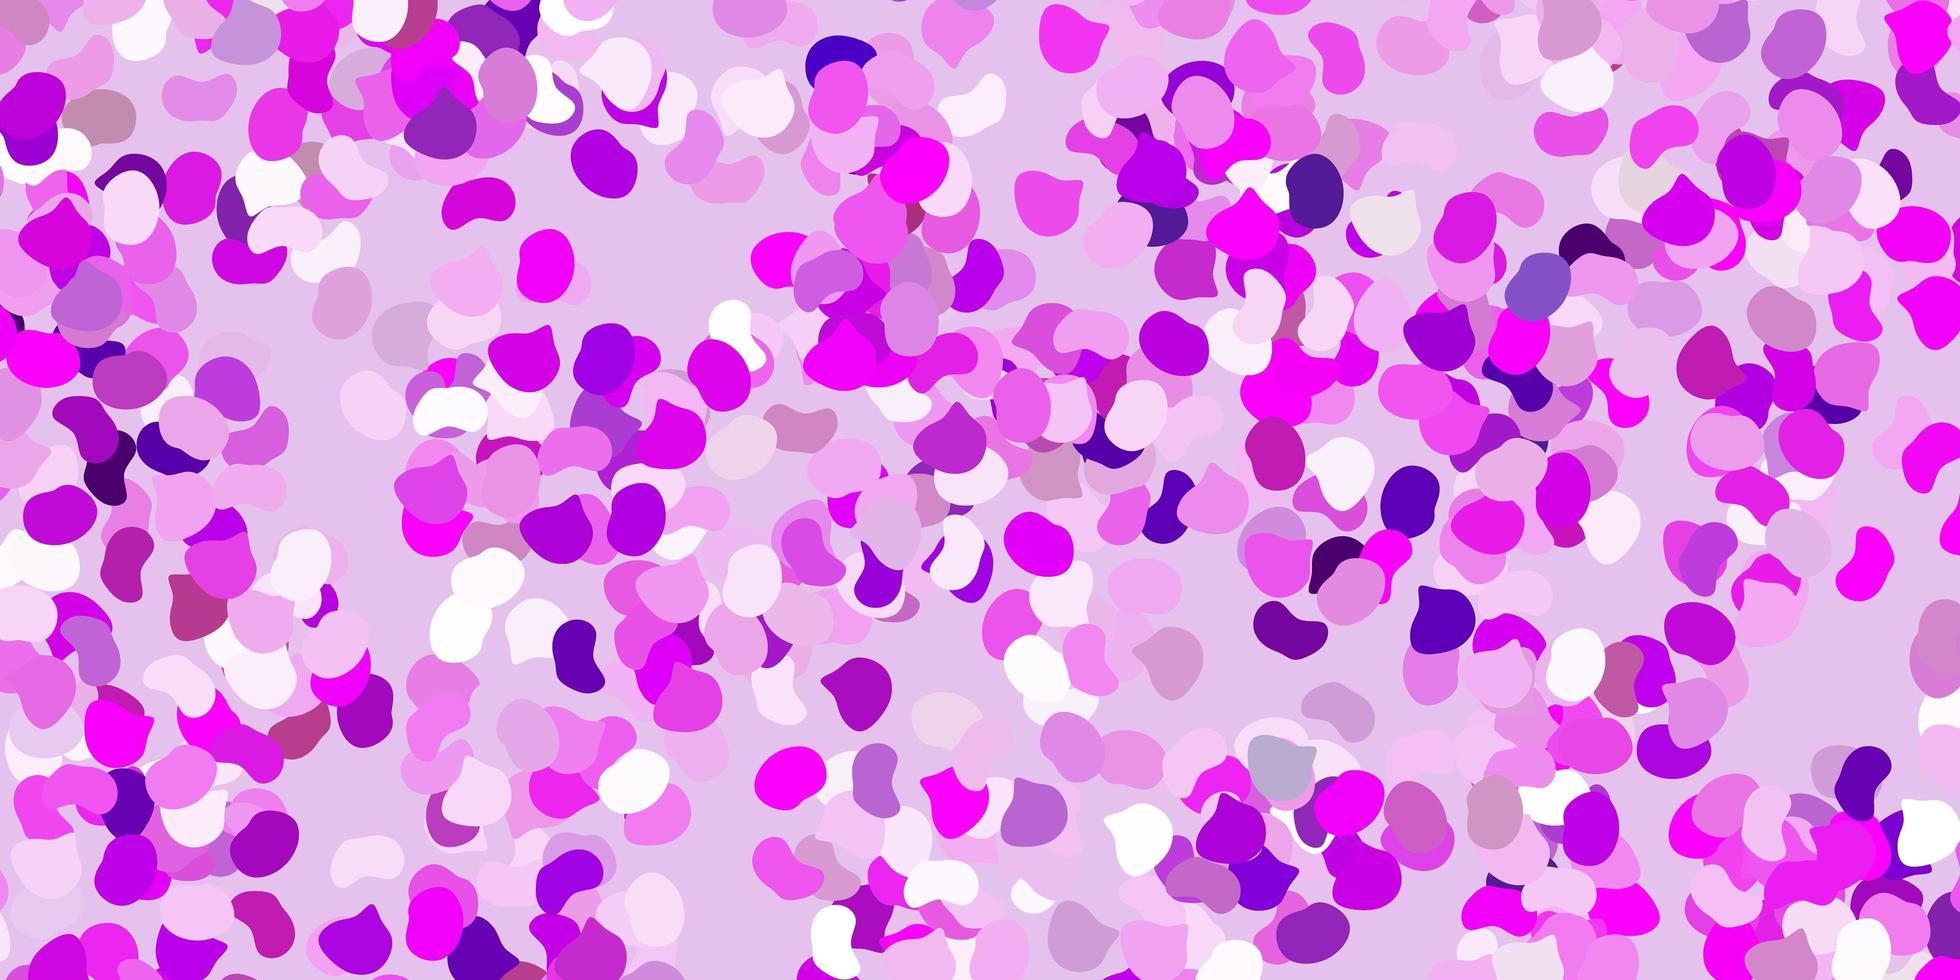 Light purple vector pattern with abstract shapes.